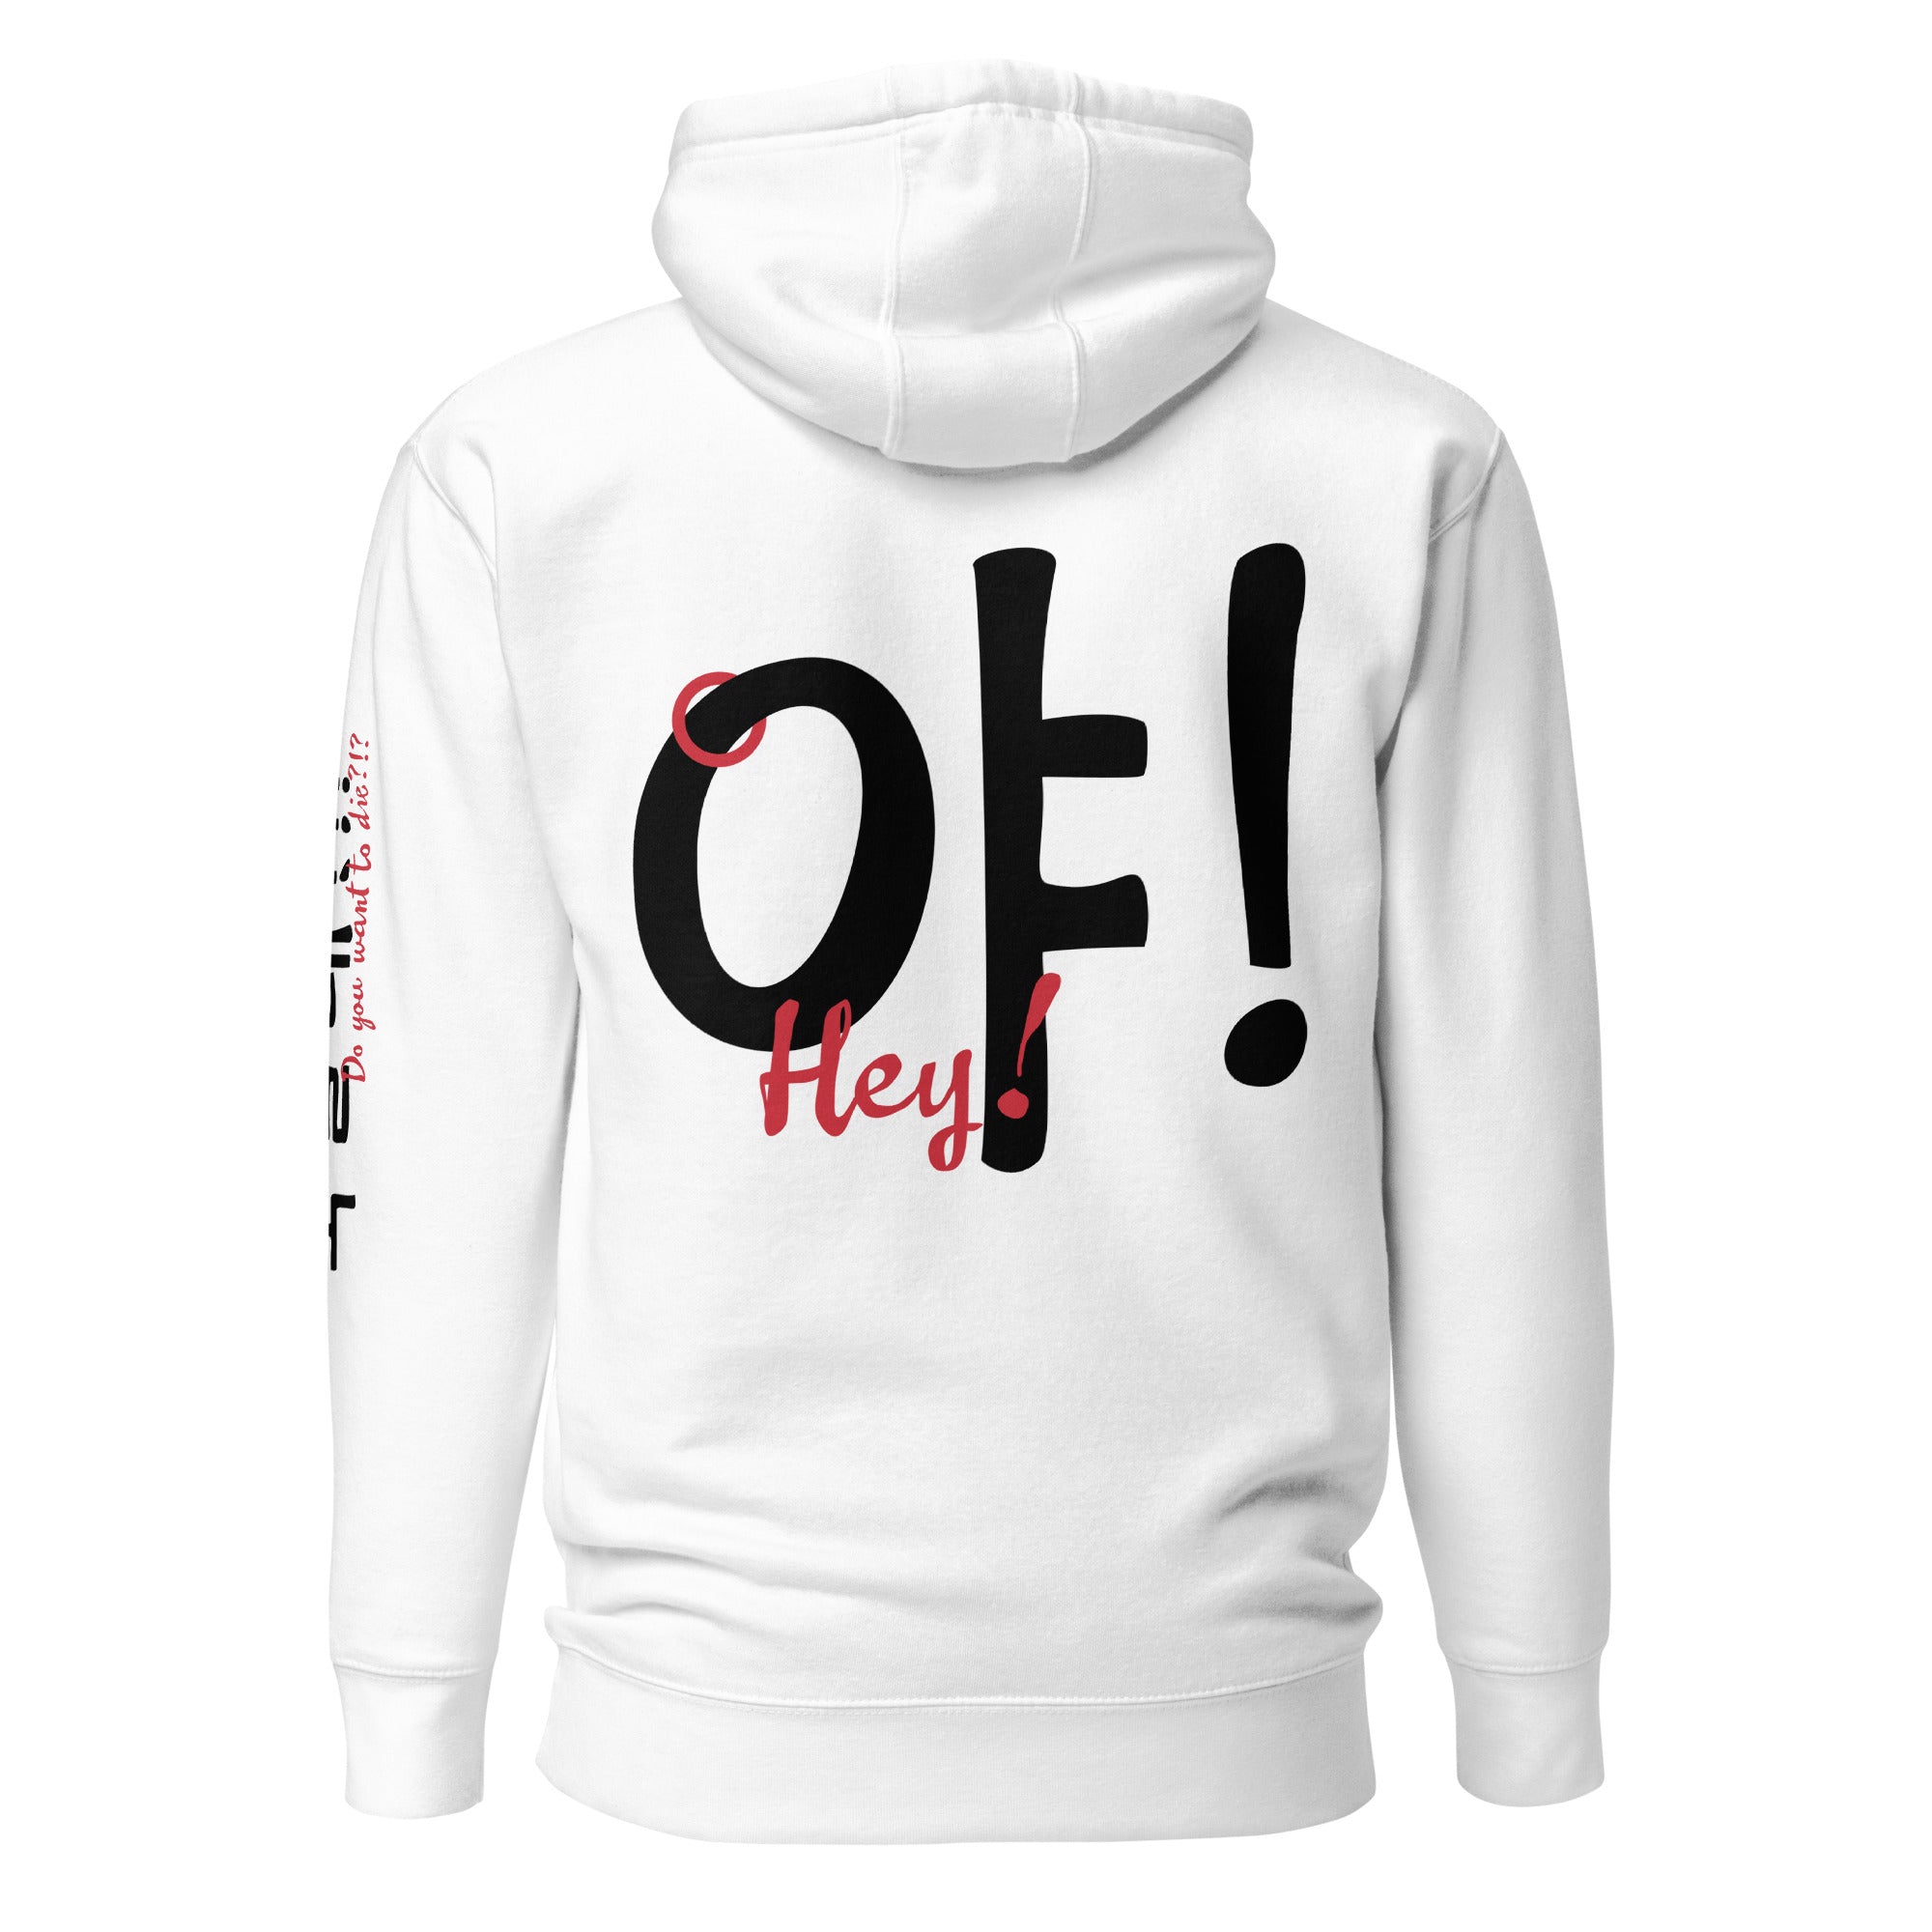 White premium hoodie with a large print of the phrase 'Hey!' in Hangul and English